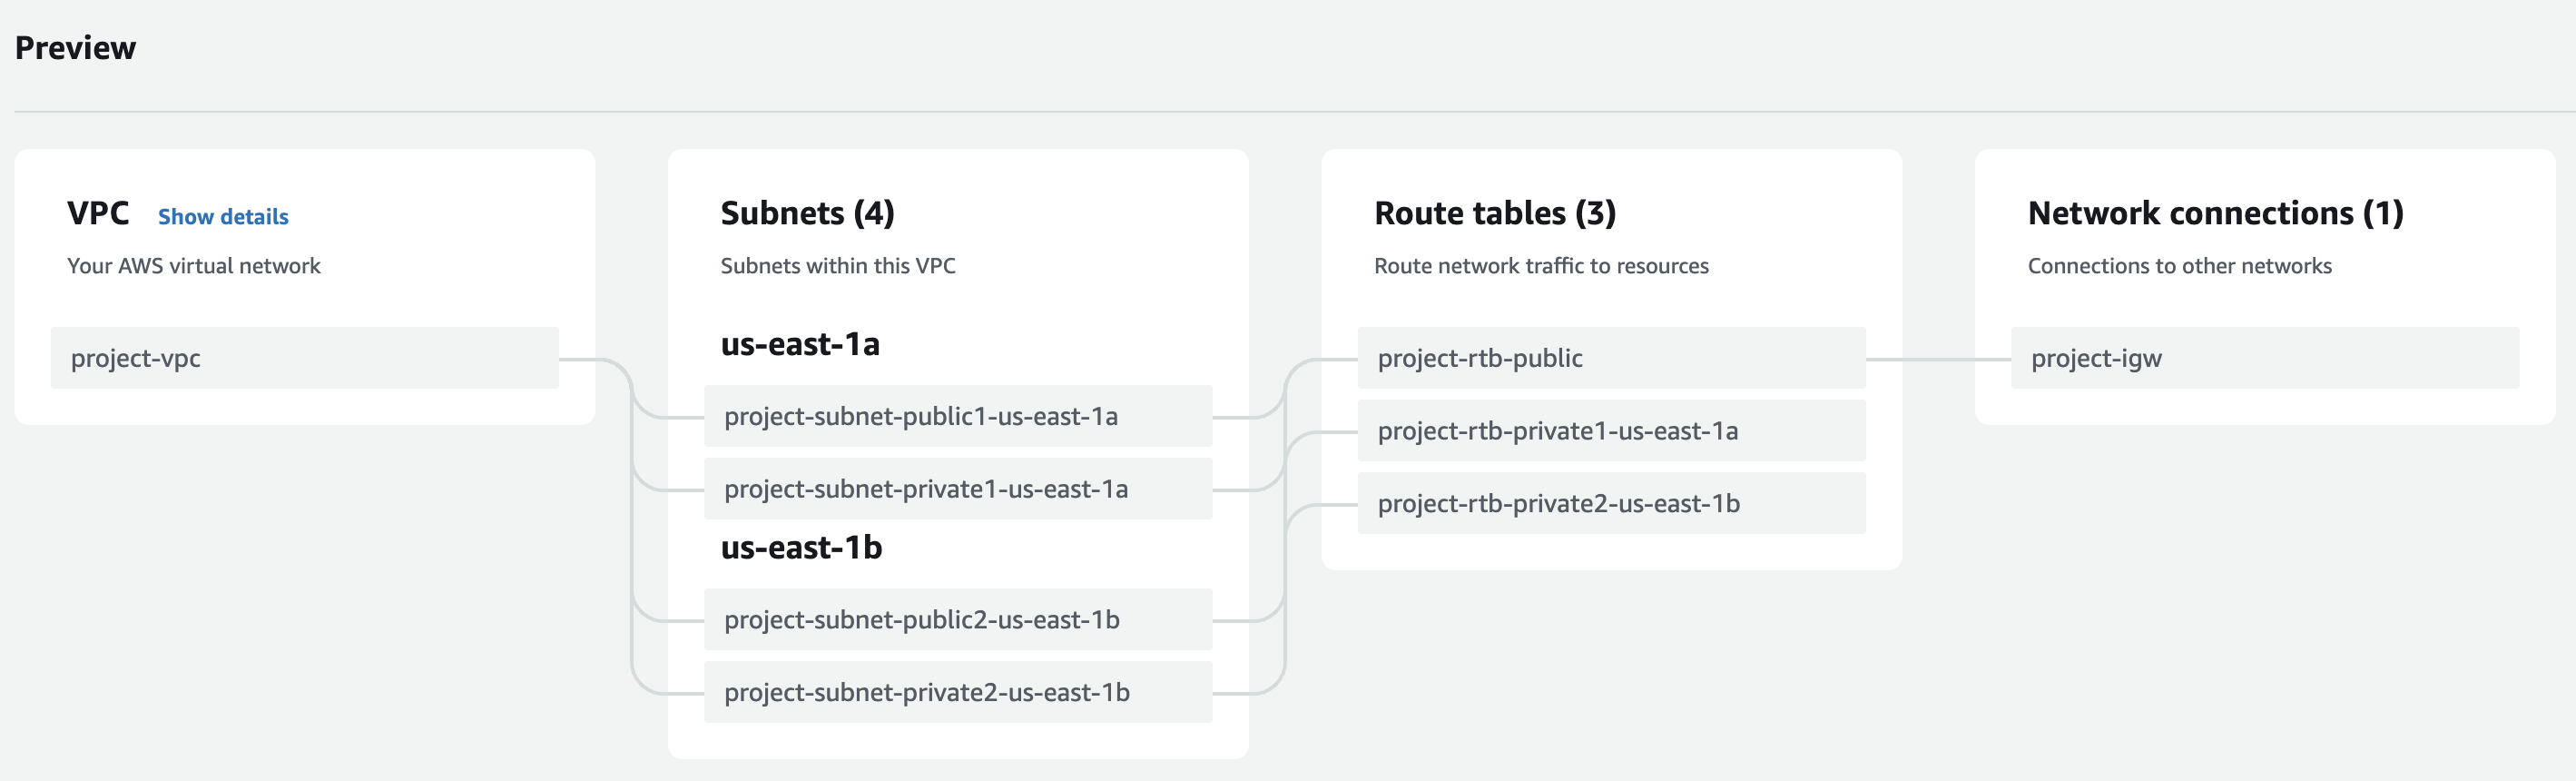 Screenshot of the VPC preview within the AWS console. Under "VPC", "project-vpc" is listed. Under "Subnets", "us-east-1a" amd "us-east-1b" both contain two subnets, one public and one private. Under "Route tables", one public and two private route tables are listed. Finally, under "Network connections", one internet gateway is listed.